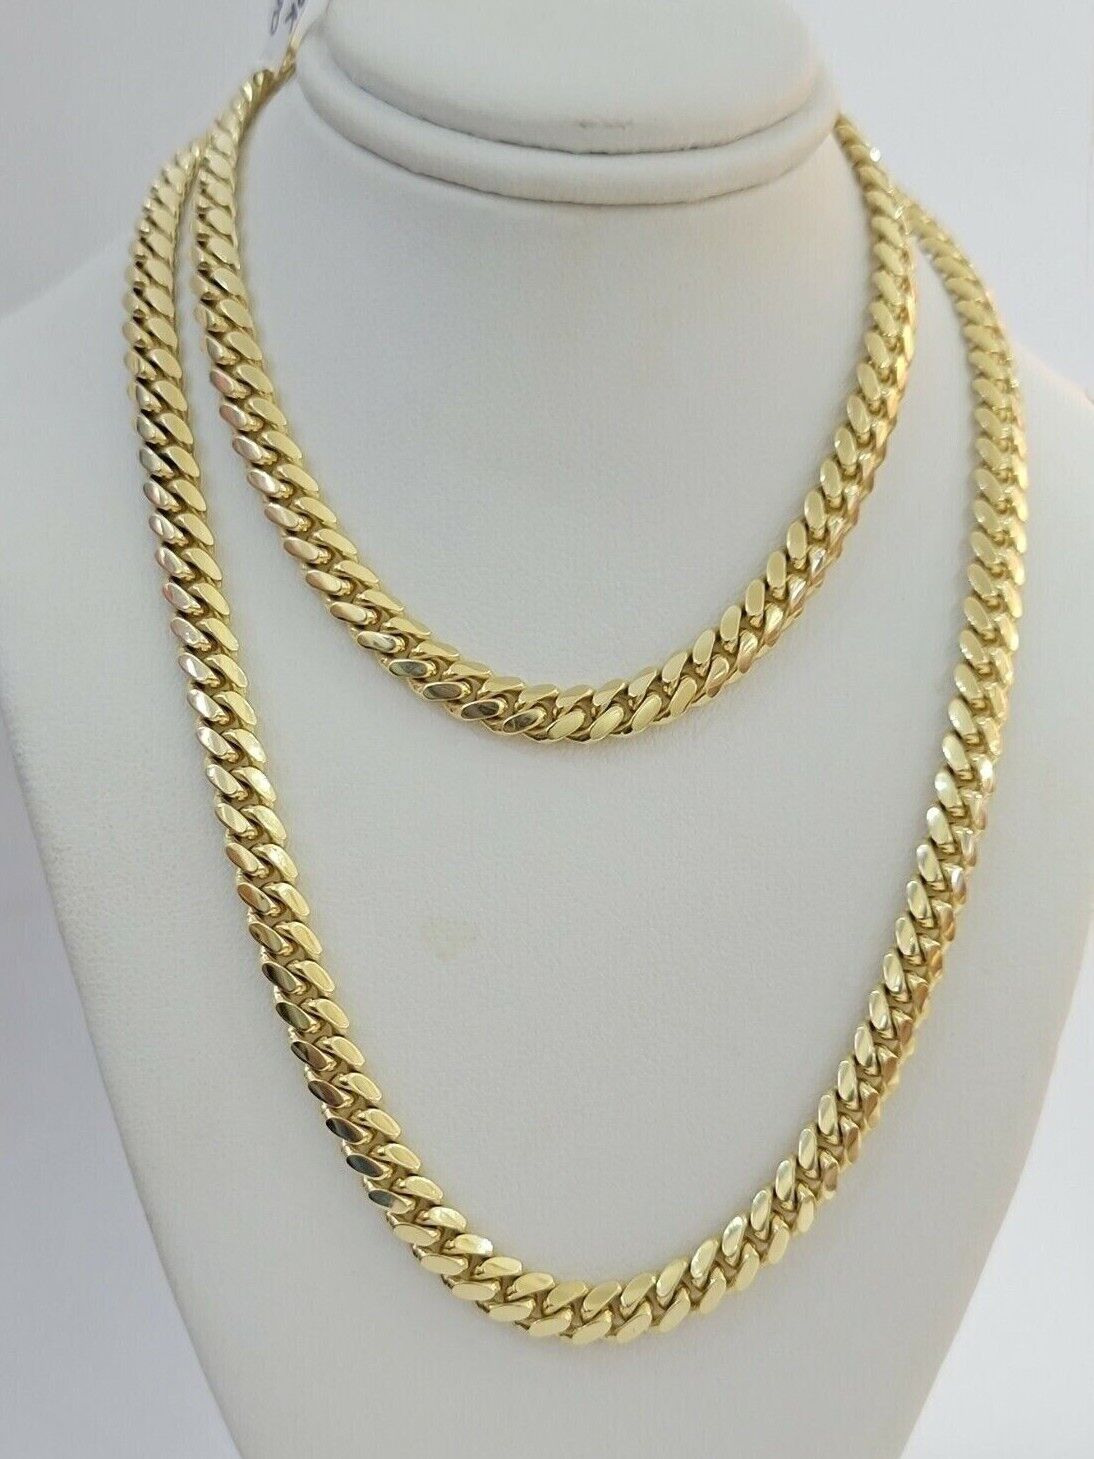 Men's Solid Wheat Chain Necklace Stainless Steel 3mm 22